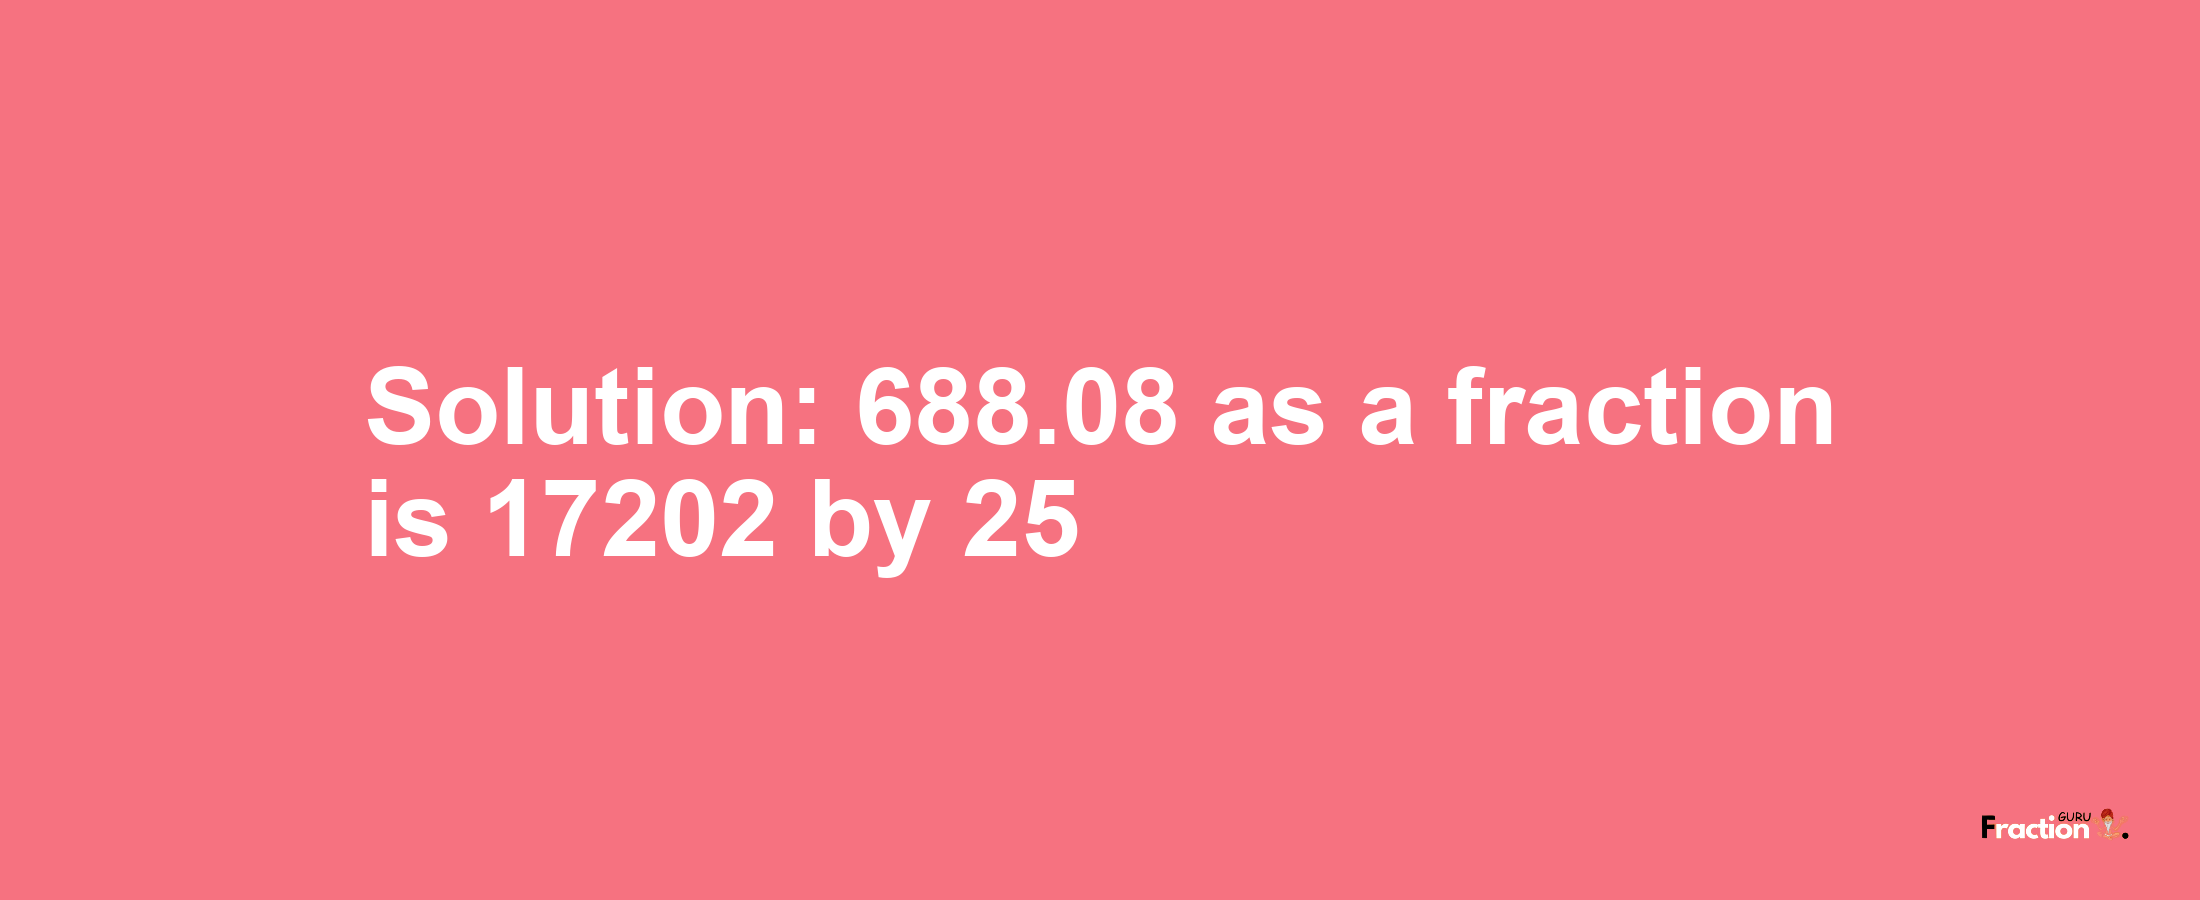 Solution:688.08 as a fraction is 17202/25